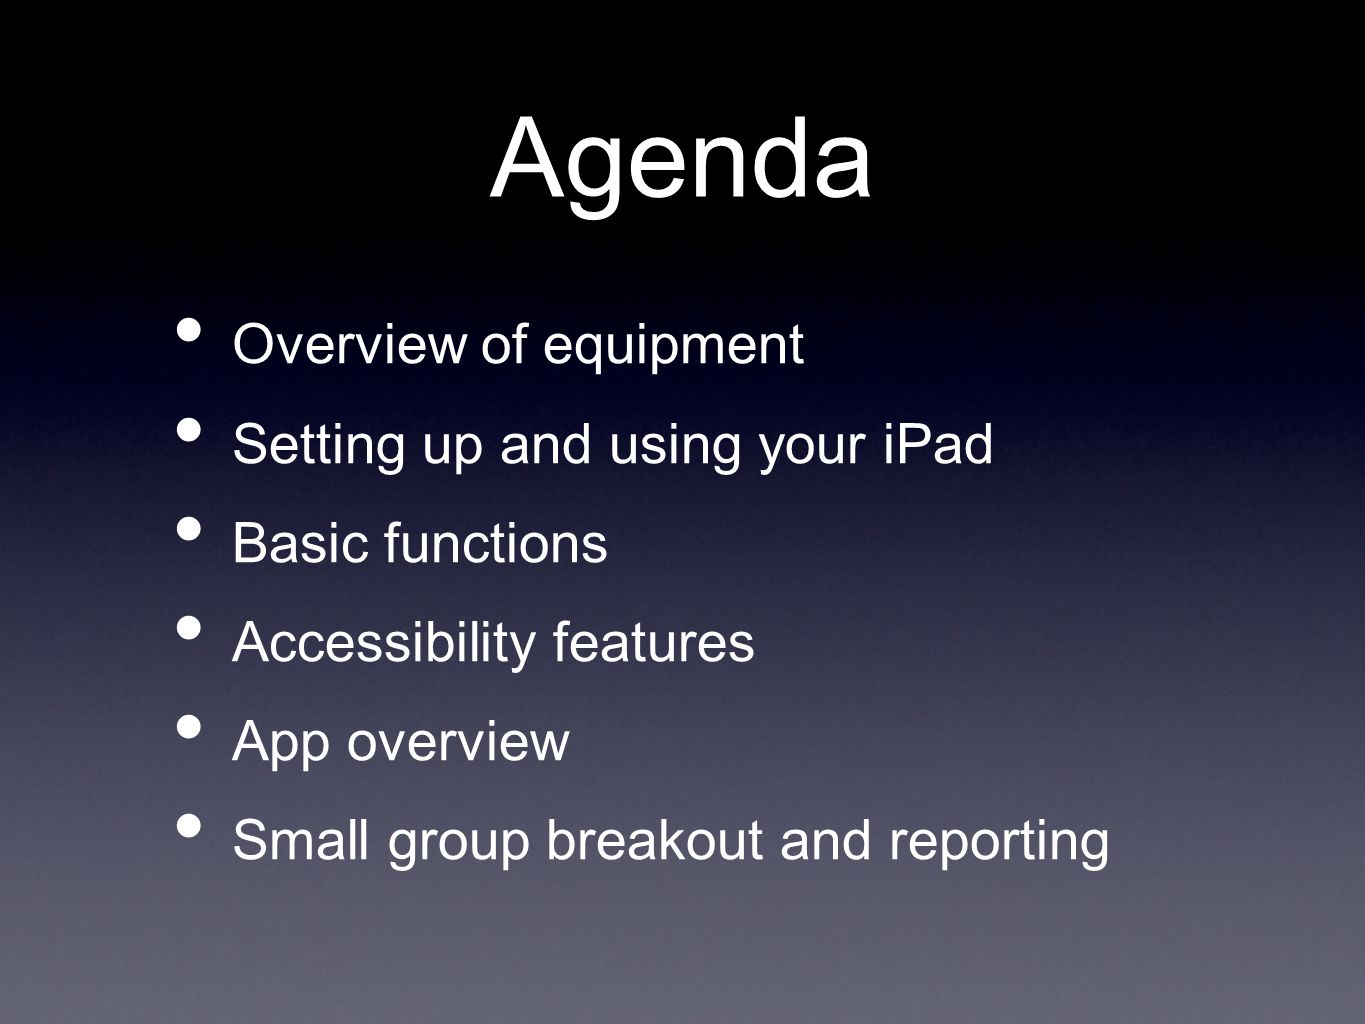 Agenda Overview of equipment Setting up and using your iPad Basic functions Accessibility features App overview Small group breakout and reporting